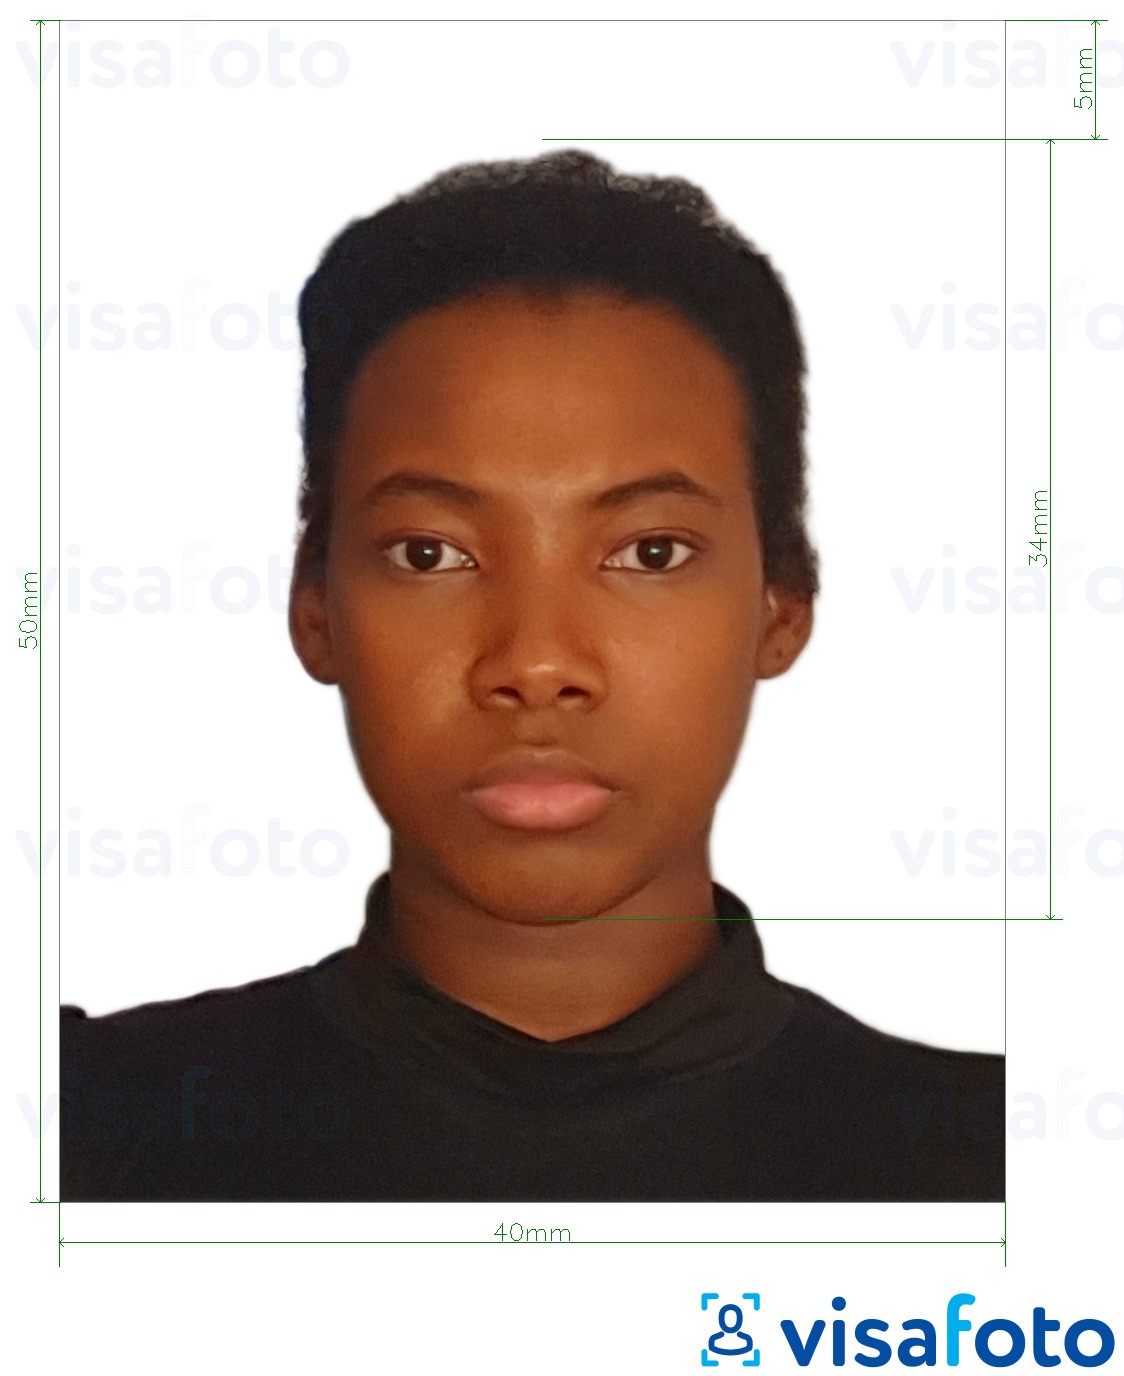 Example of photo for Dominican Republic visa 4x5 cm with exact size specification